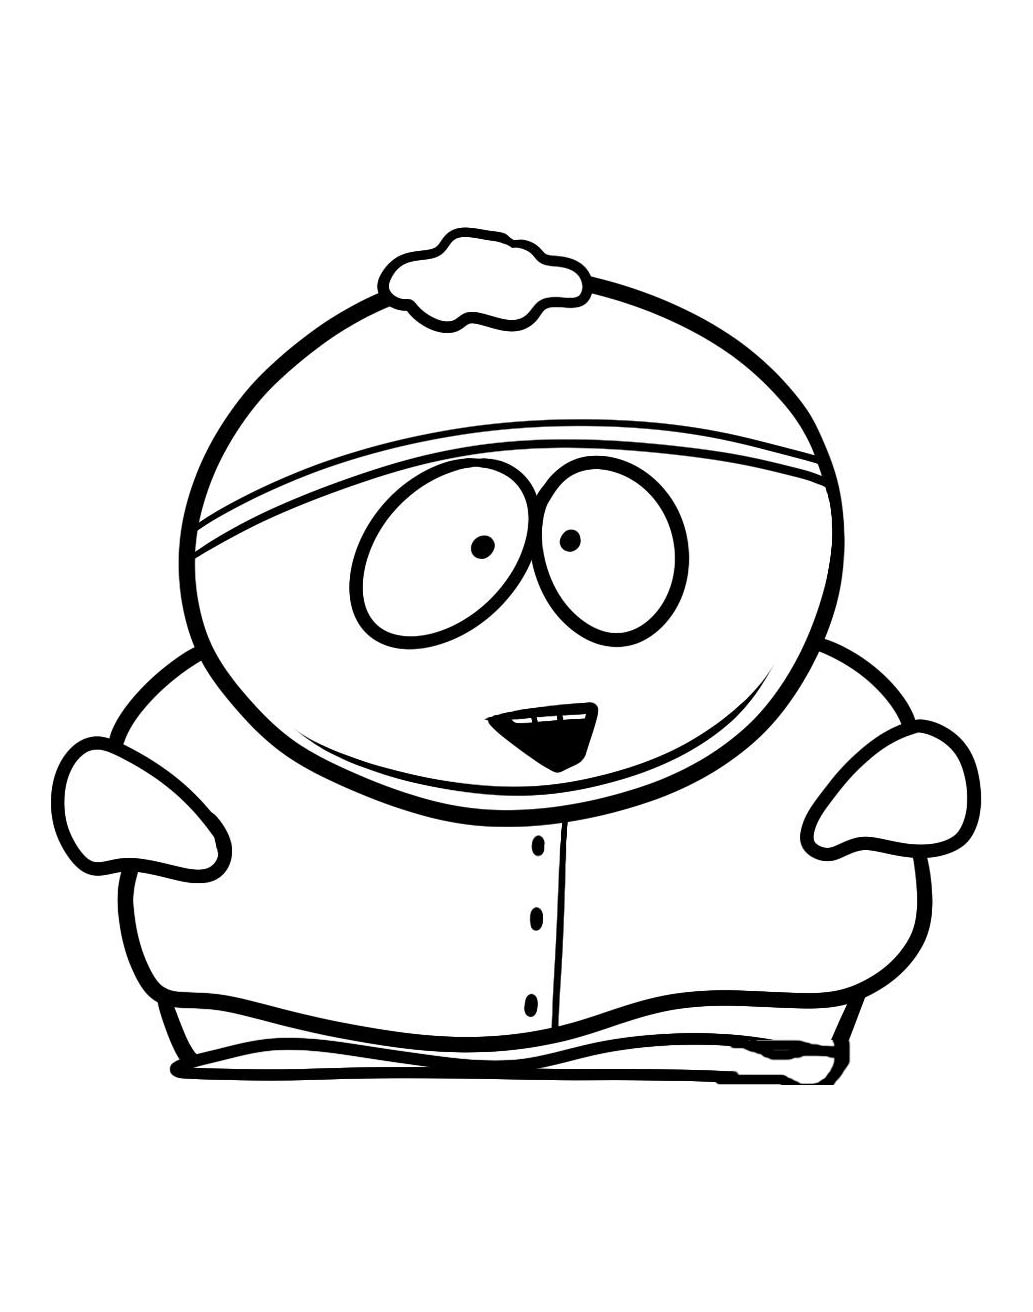 Image of Eric Cartman to color